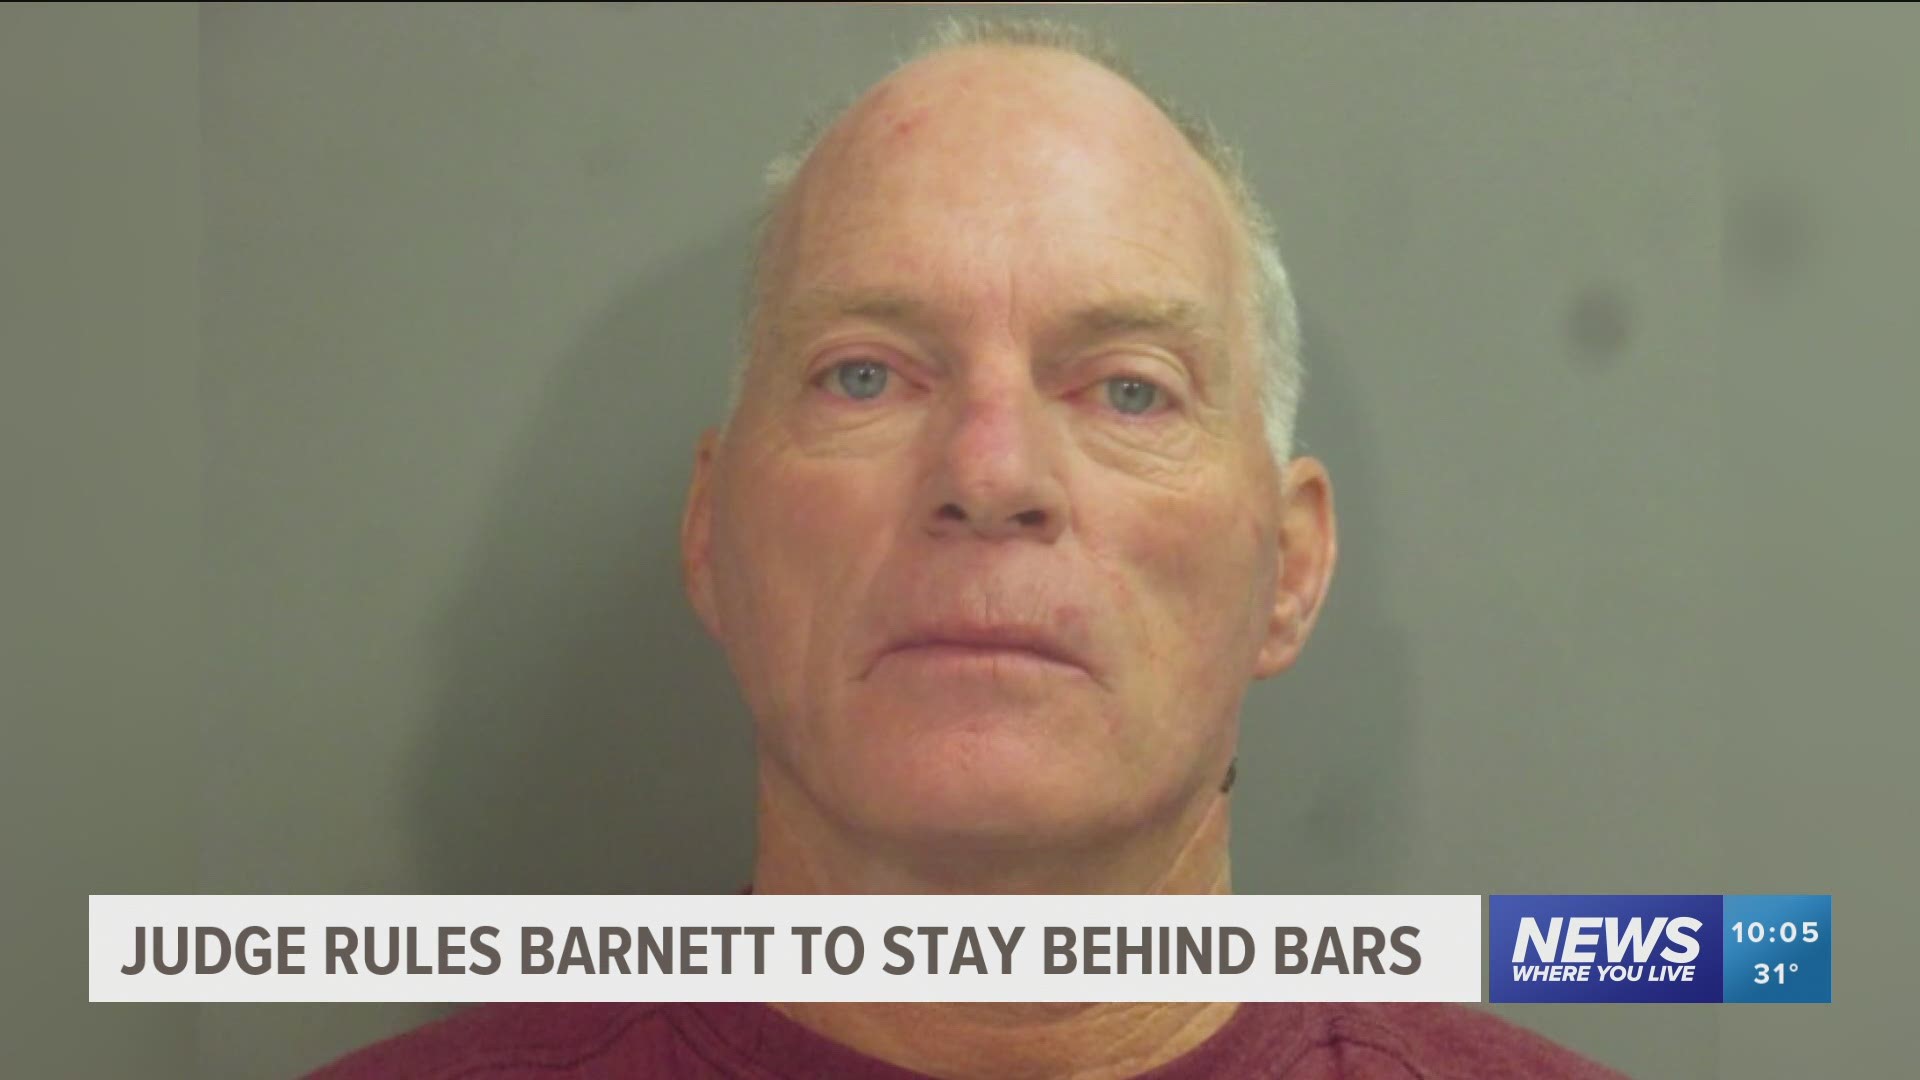 Judge rules Richard Barnett has to stay jailed until trial